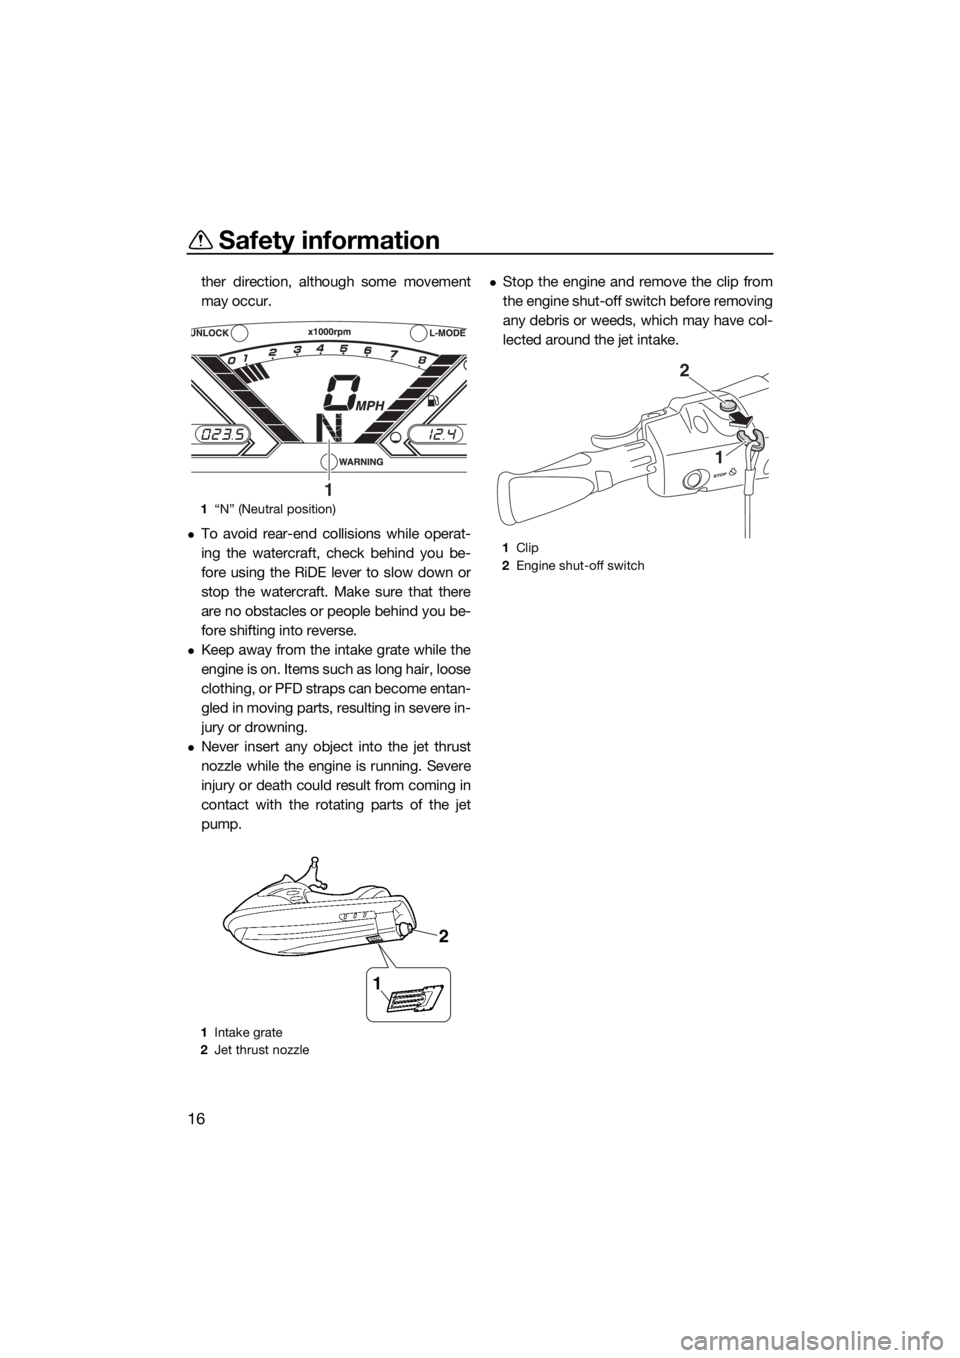 YAMAHA VX 2018  Owners Manual Safety information
16
ther direction, although some movement
may occur.
To avoid rear-end collisions while operat-
ing the watercraft, check behind you be-
fore using the RiDE lever to slow down or